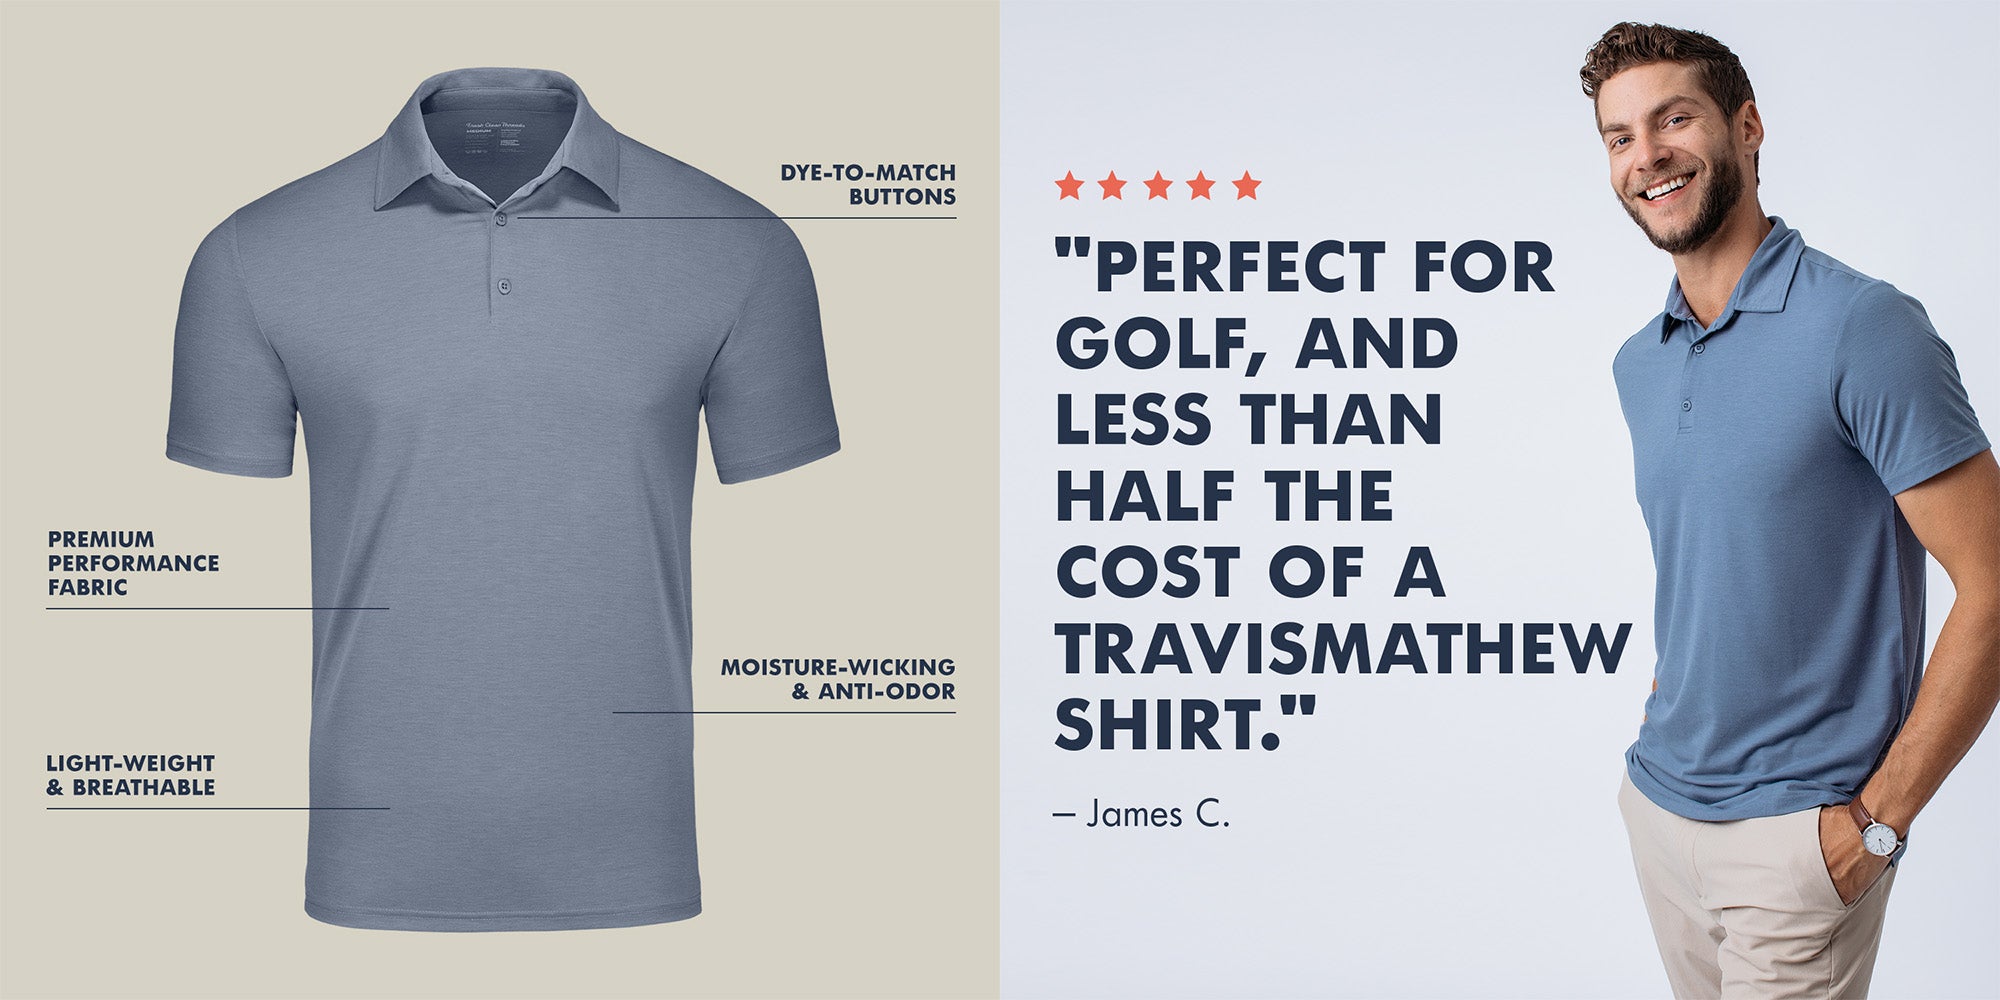 Shop FCT's 5-Star Performance Polos